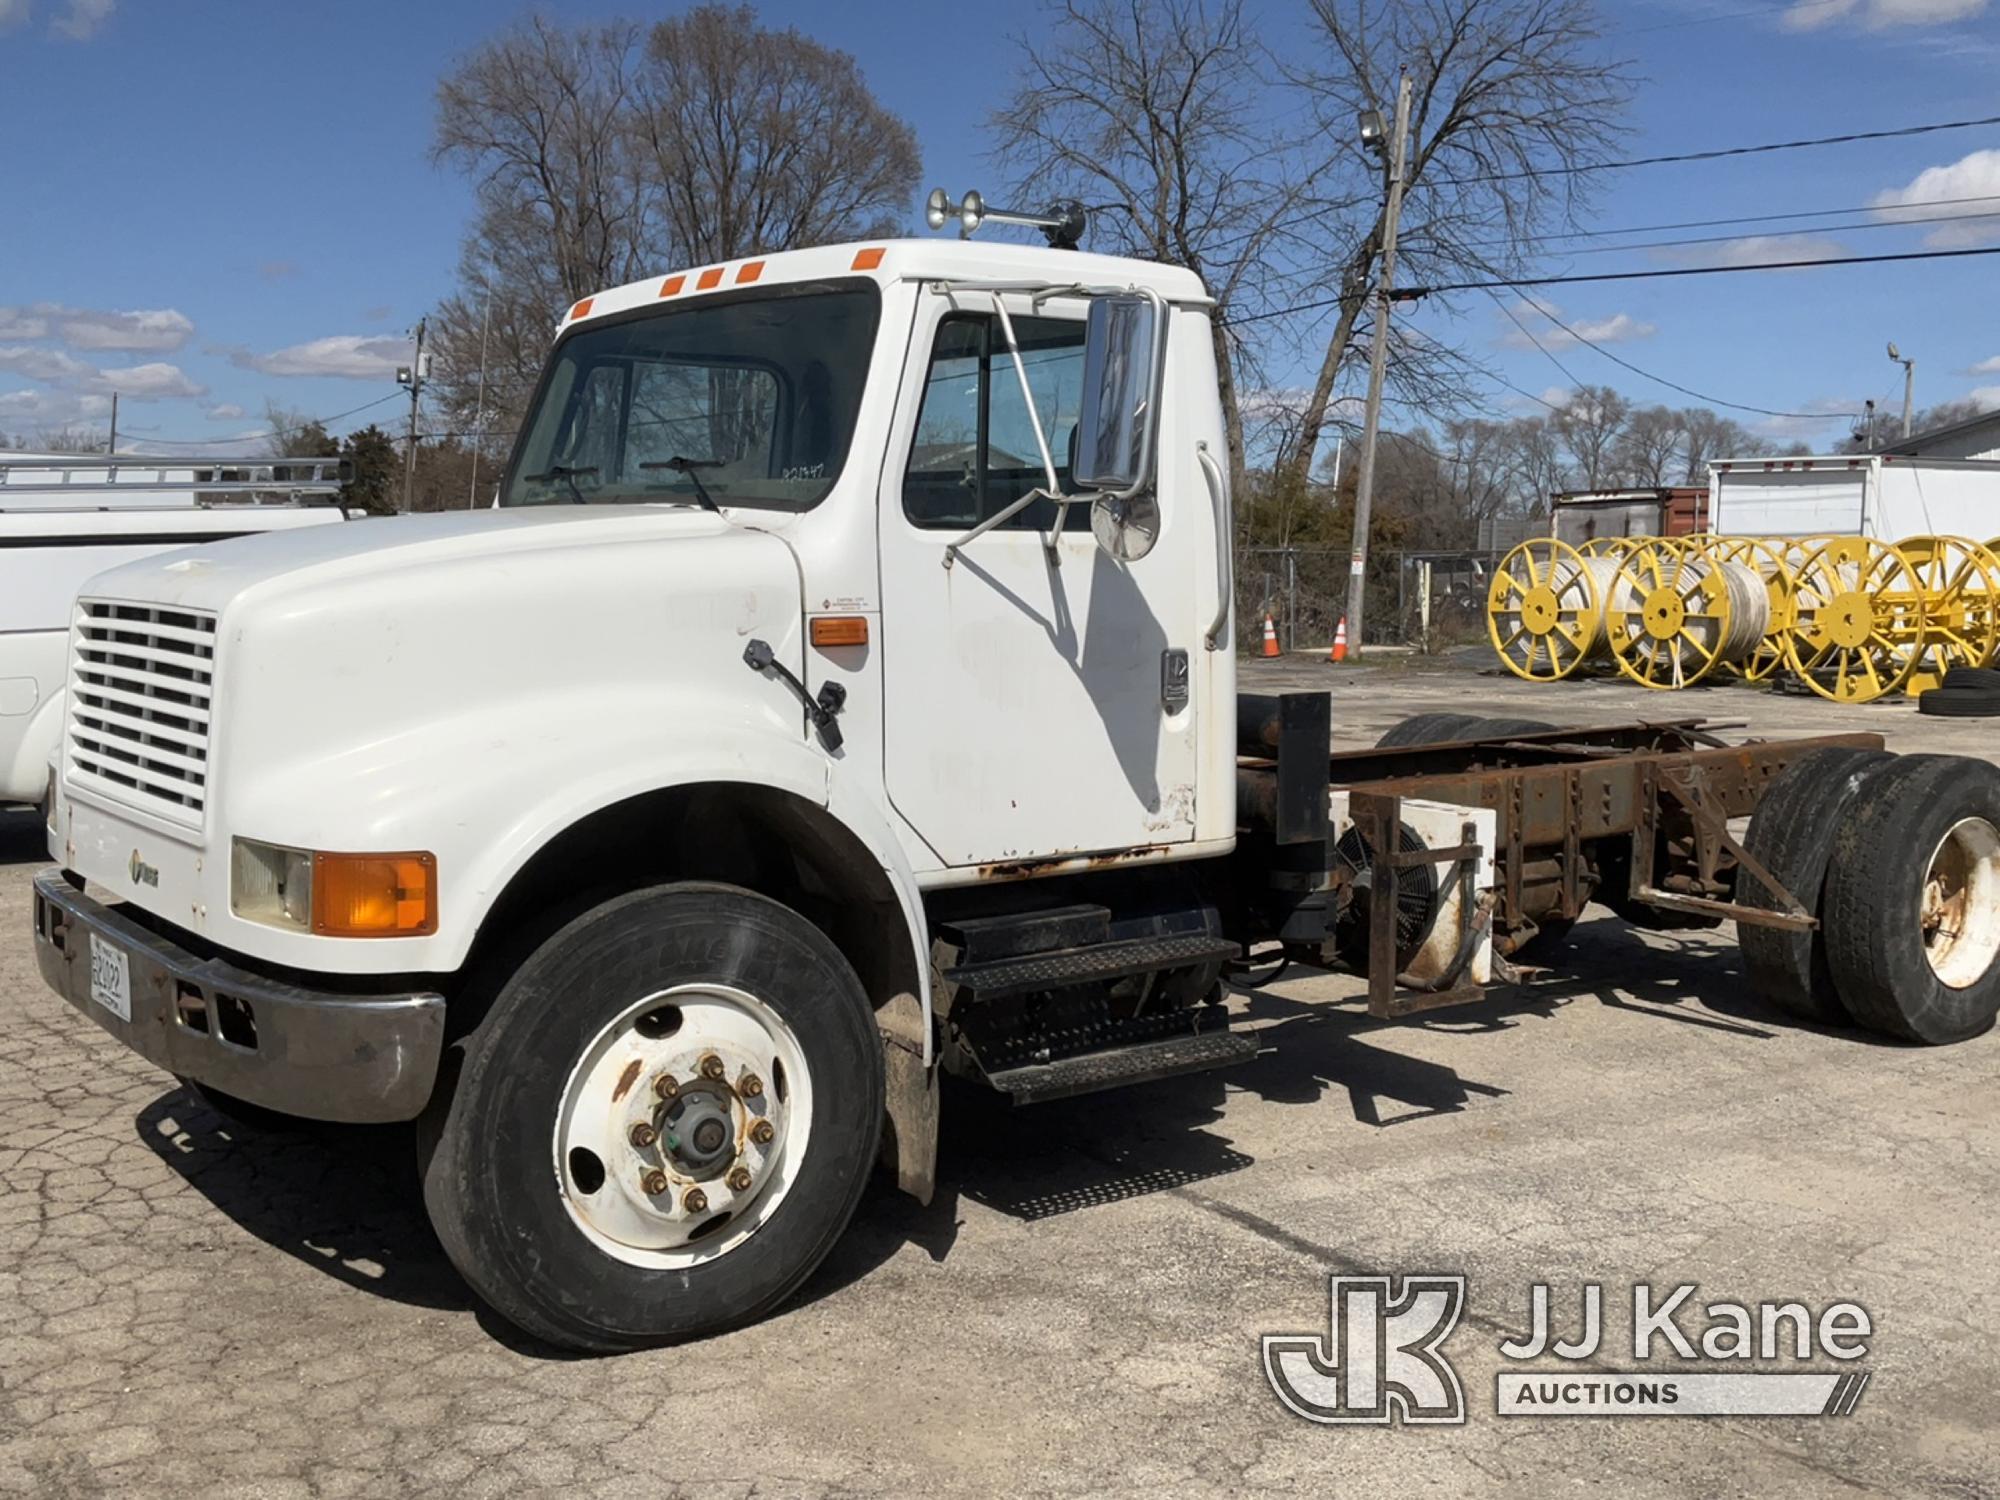 (South Beloit, IL) 1997 International 4900 Cab & Chassis Runs & Moves) (Unable to Open Passenger Doo